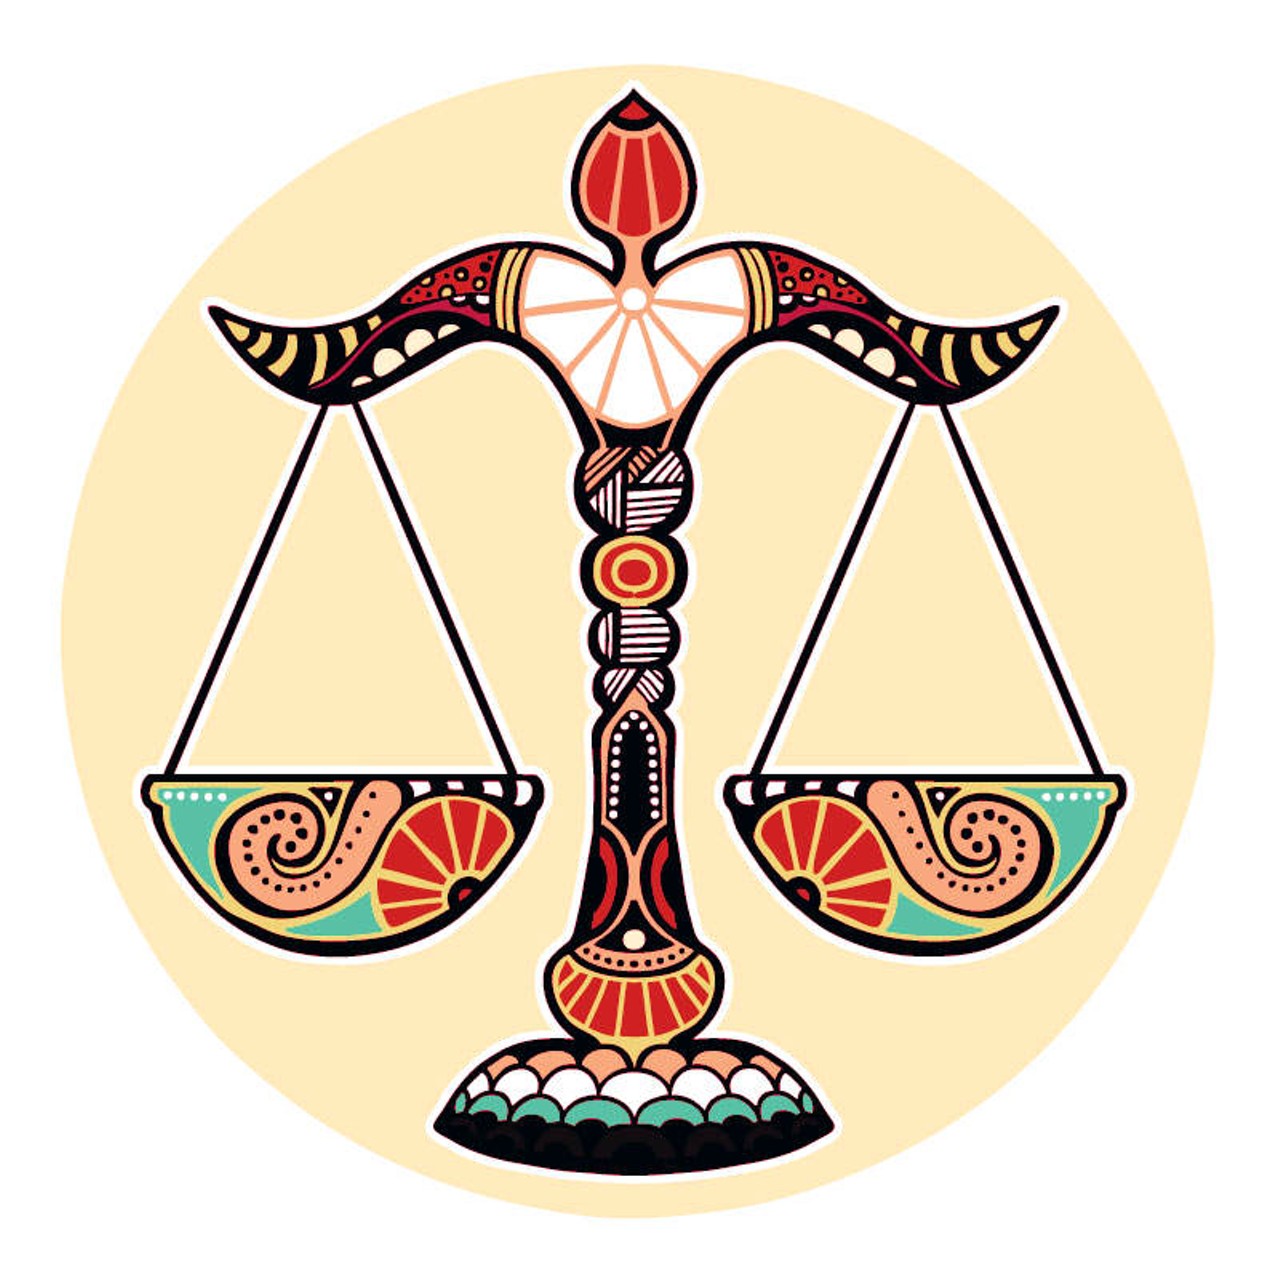 LIBRA: September 21 &#150; October 20
You wonder what to do about your current affairs. It will help you to know that they take good care of themselves when we get out of the way and pay attention to whatever it takes to handle what's next. You are at a huge crossroads. Under certain illusions, not just about yourself, but about life in general, you can't make any long term decisions when your life is tied up in knots. Unless there is a good reason to leave, you'd do well to stay put and stabilize yourself, until you get a clear sign from the Karmic telegraph that you have enough strength and clarity to move on.